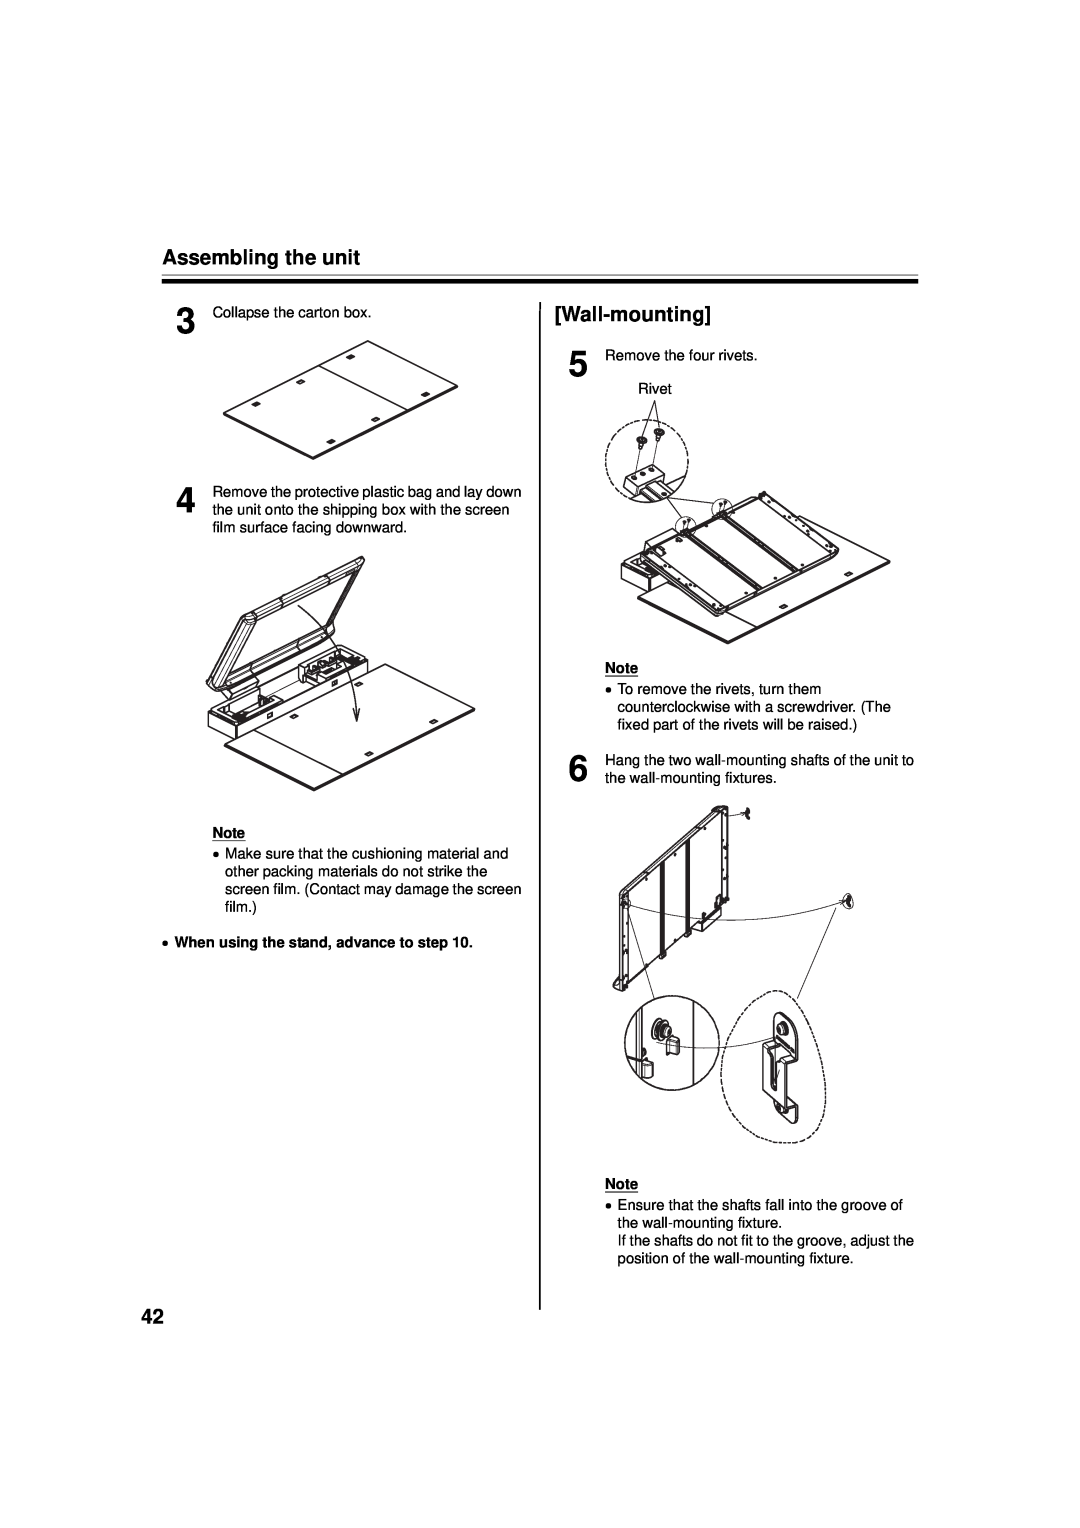 Panasonic UB-5838C, UB-5338C Assembling the unit, Wall-mounting, When using the stand, advance to step 